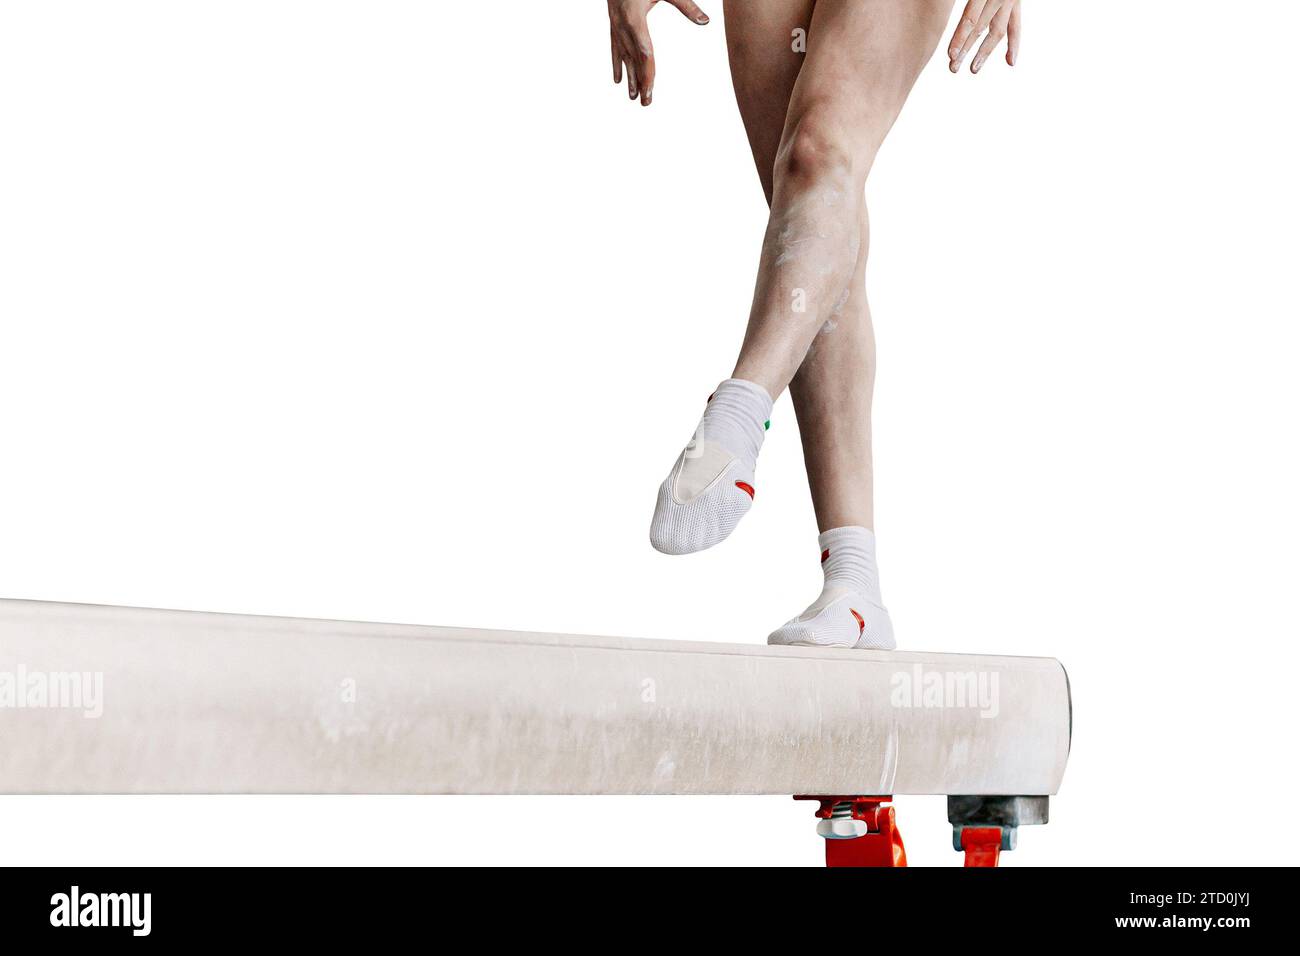 legs female gymnast step on balance beam in artistic gymnastics isolated on white background, sports summer games Stock Photo